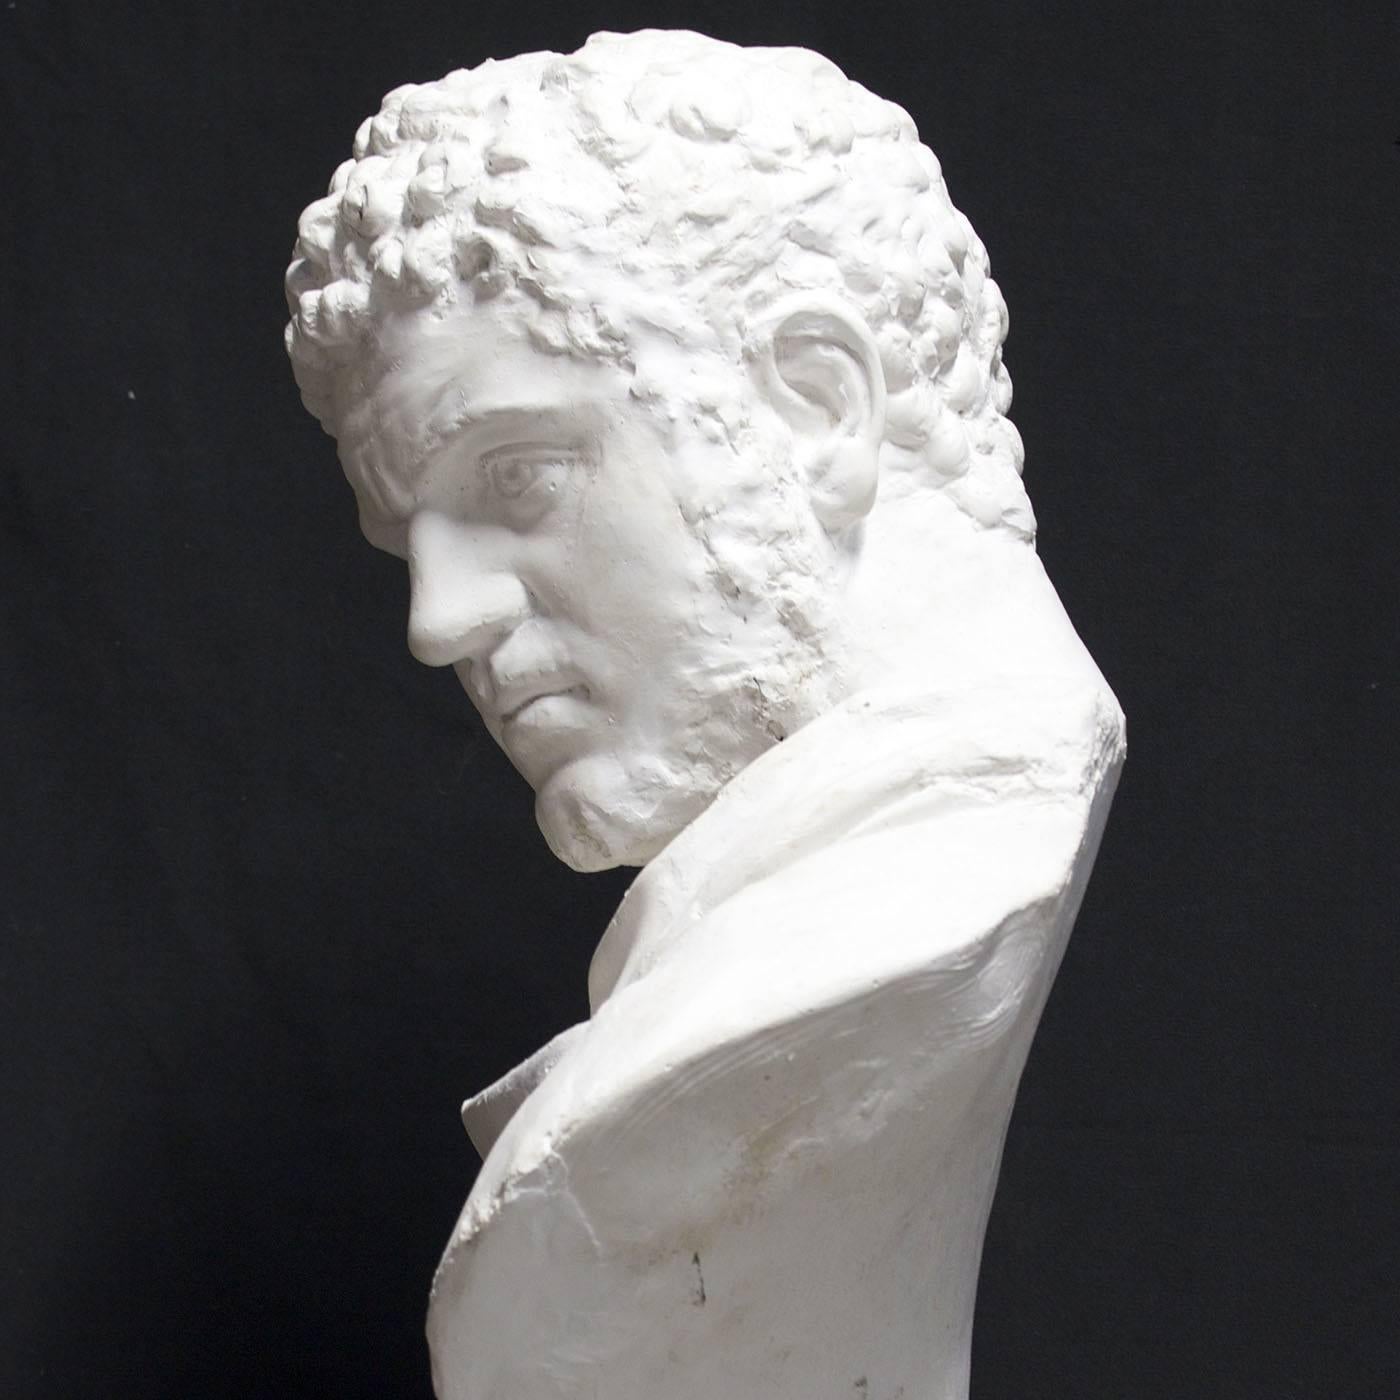 This is the bust of the Roman Emperor Caracalla modeled after a famous sculpture one displayed in the Vatican Museum. In Roman times this bust was a particularly innovative representation, as the face turns towards the left instead of the usual